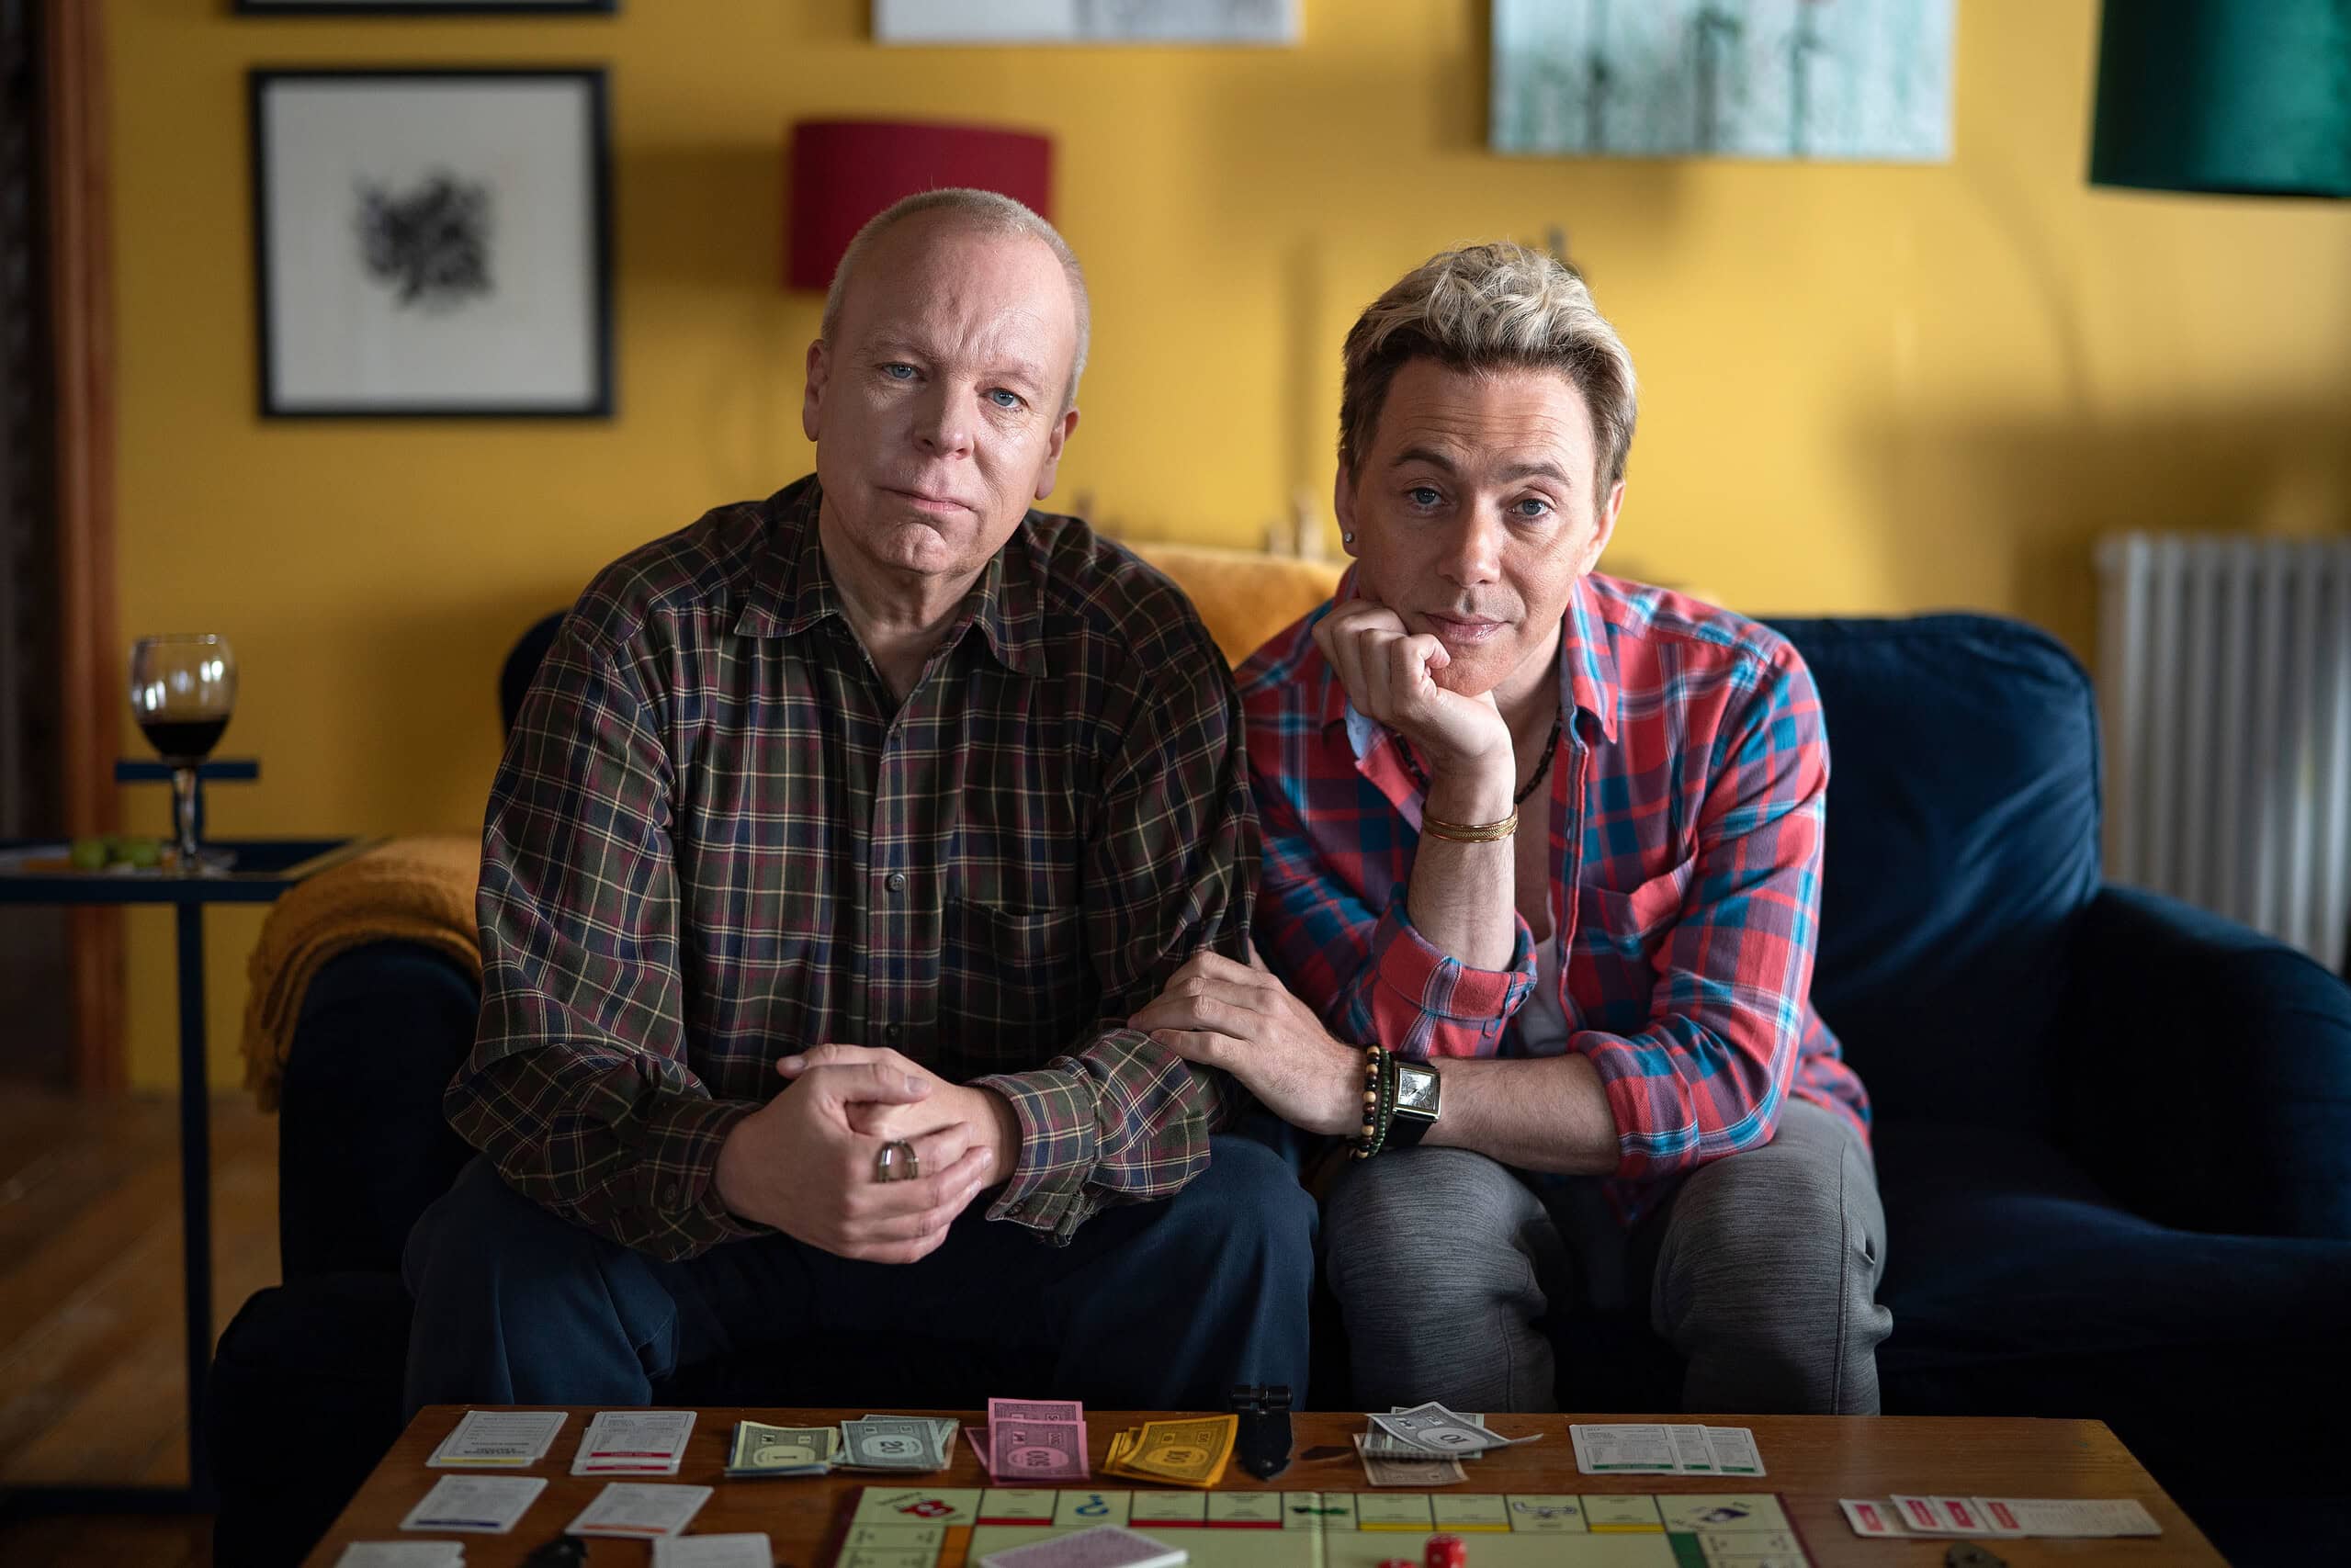 Inside No. 9 Concludes With Star-Studded and Emotional Finale